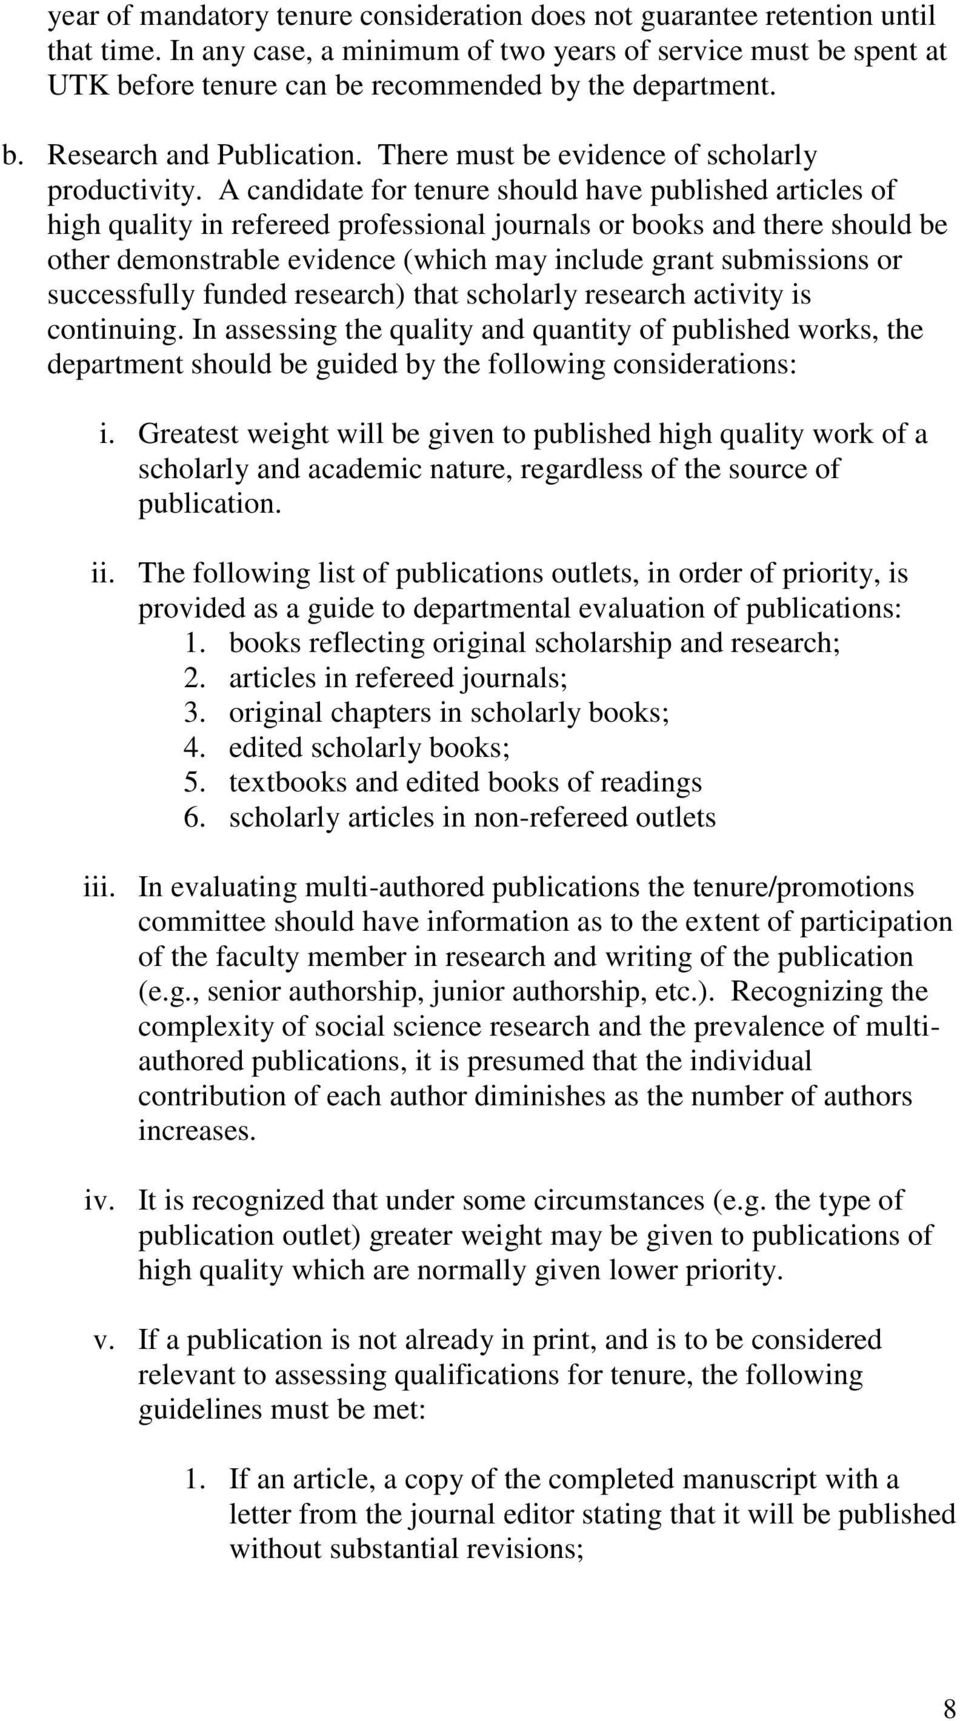 A candidate for tenure should have published articles of high quality in refereed professional journals or books and there should be other demonstrable evidence (which may include grant submissions